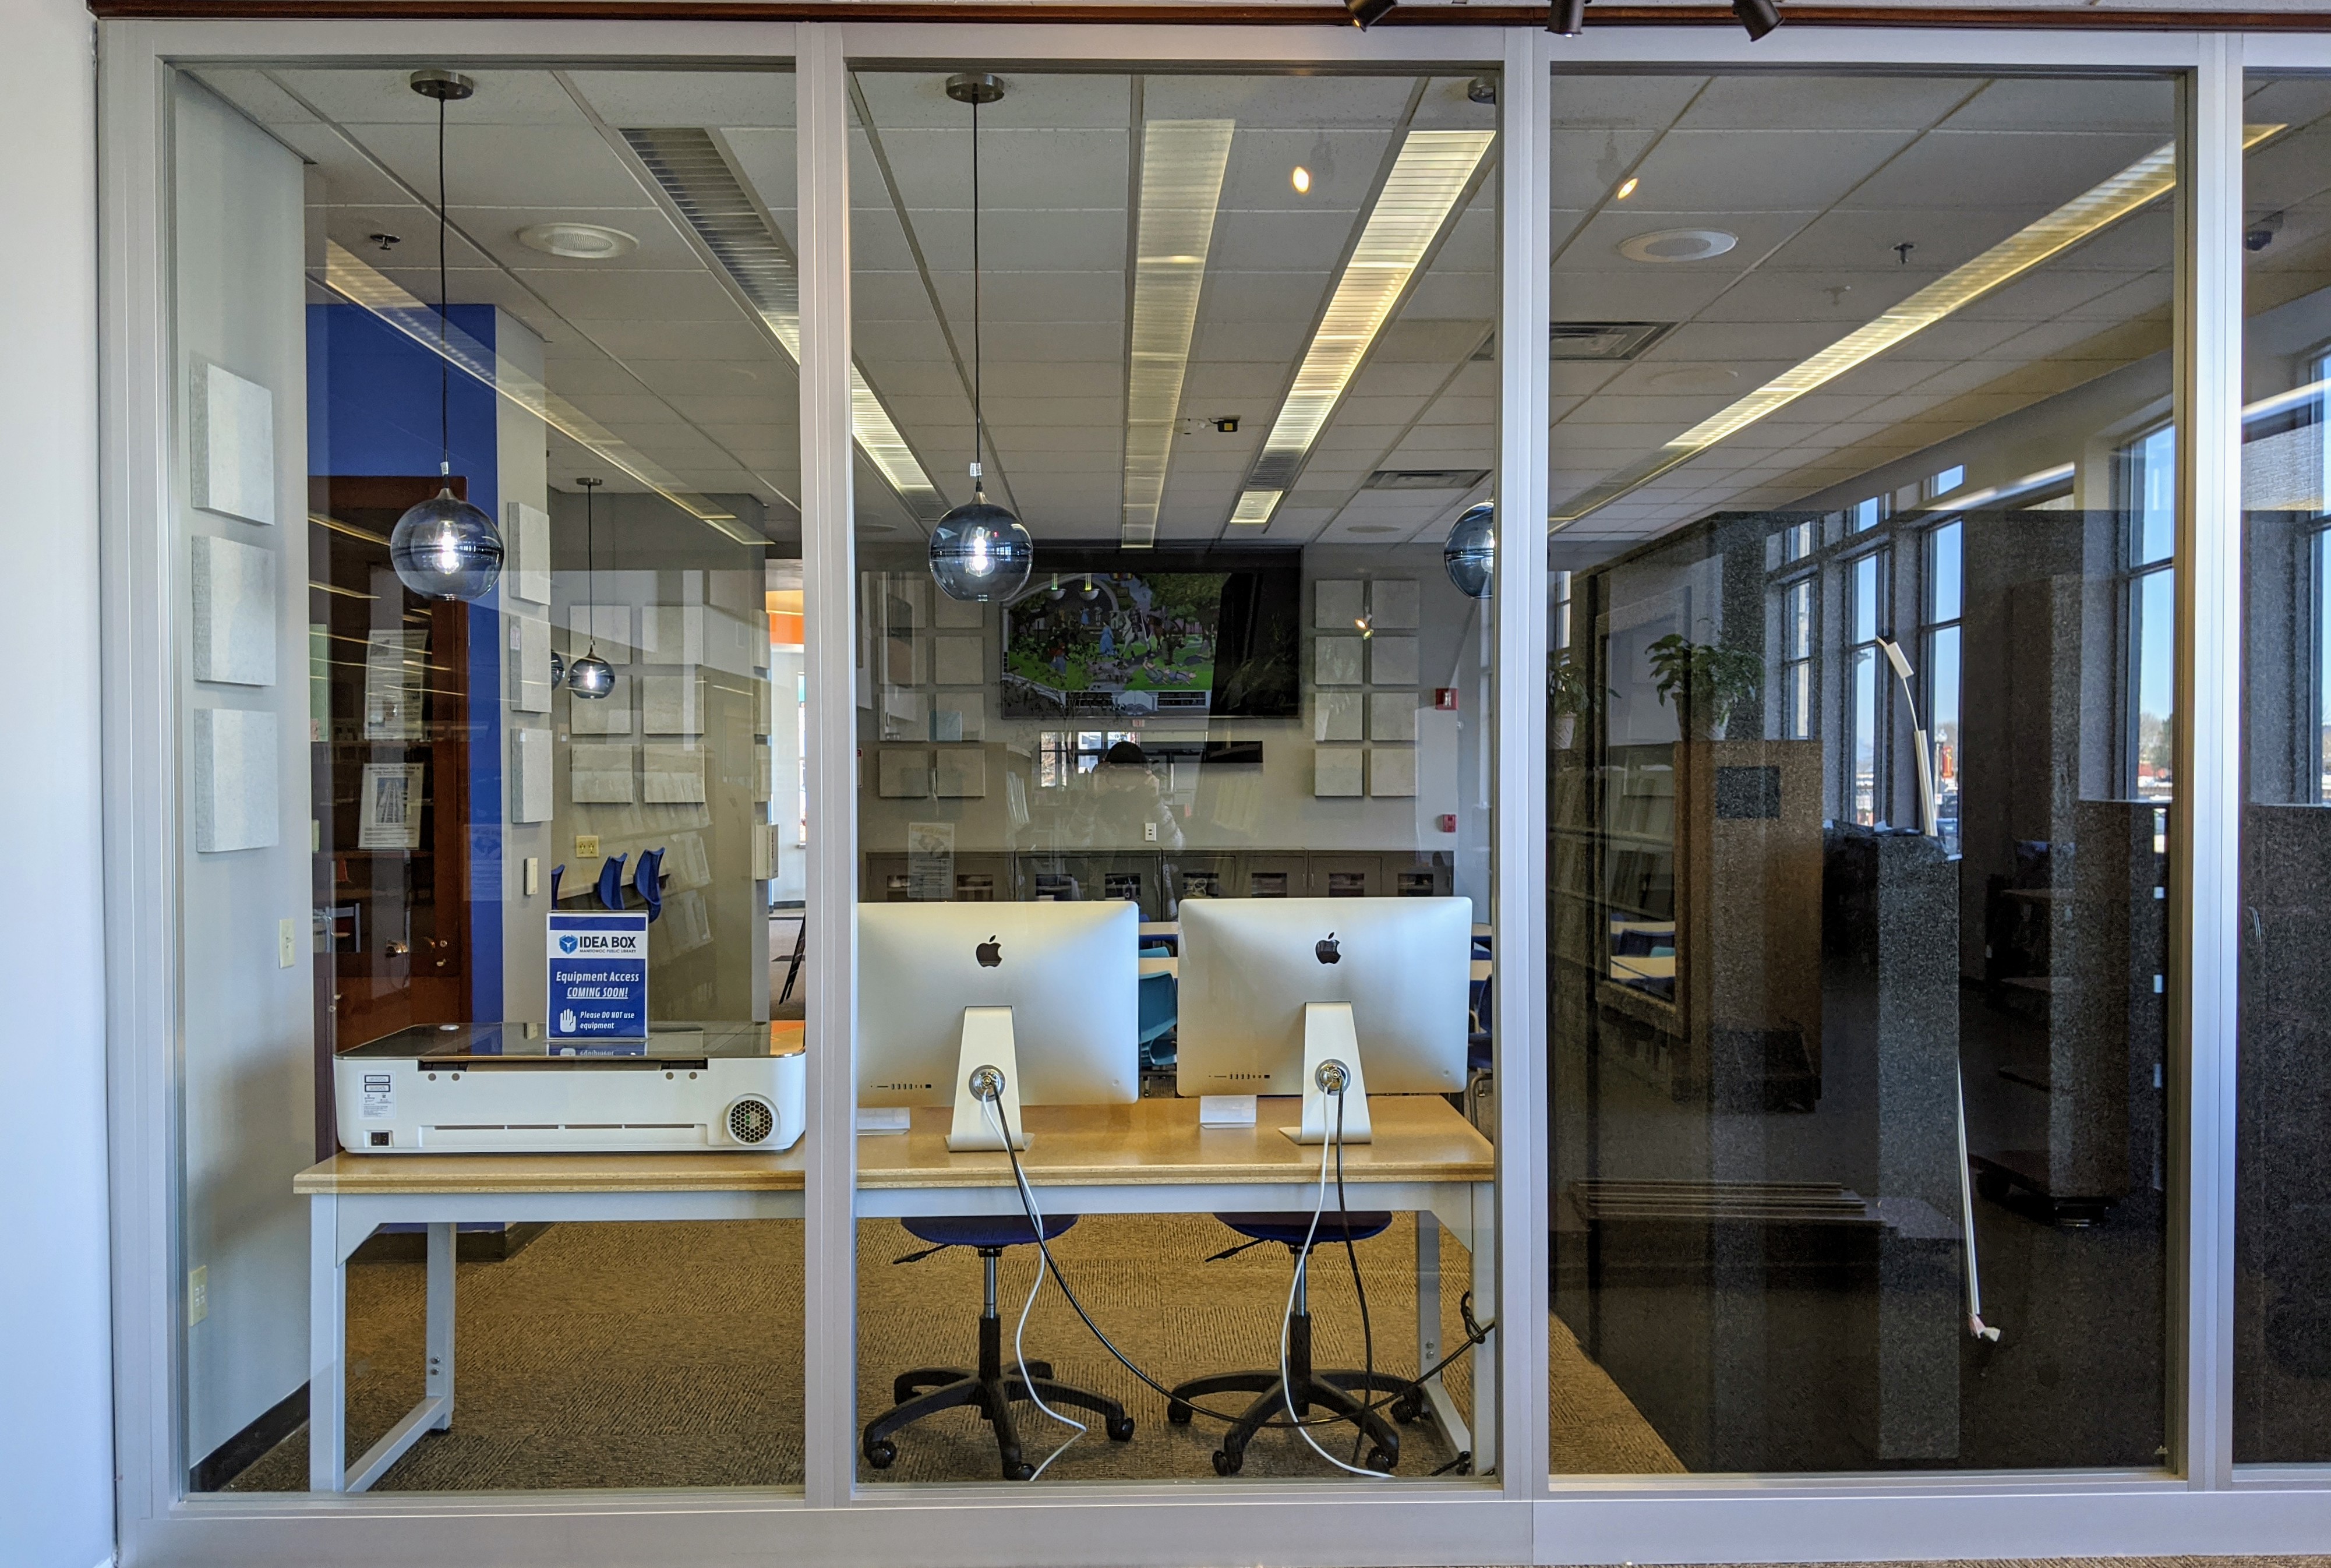 Glowforge and iMac stations taken from outside Idea Box windows